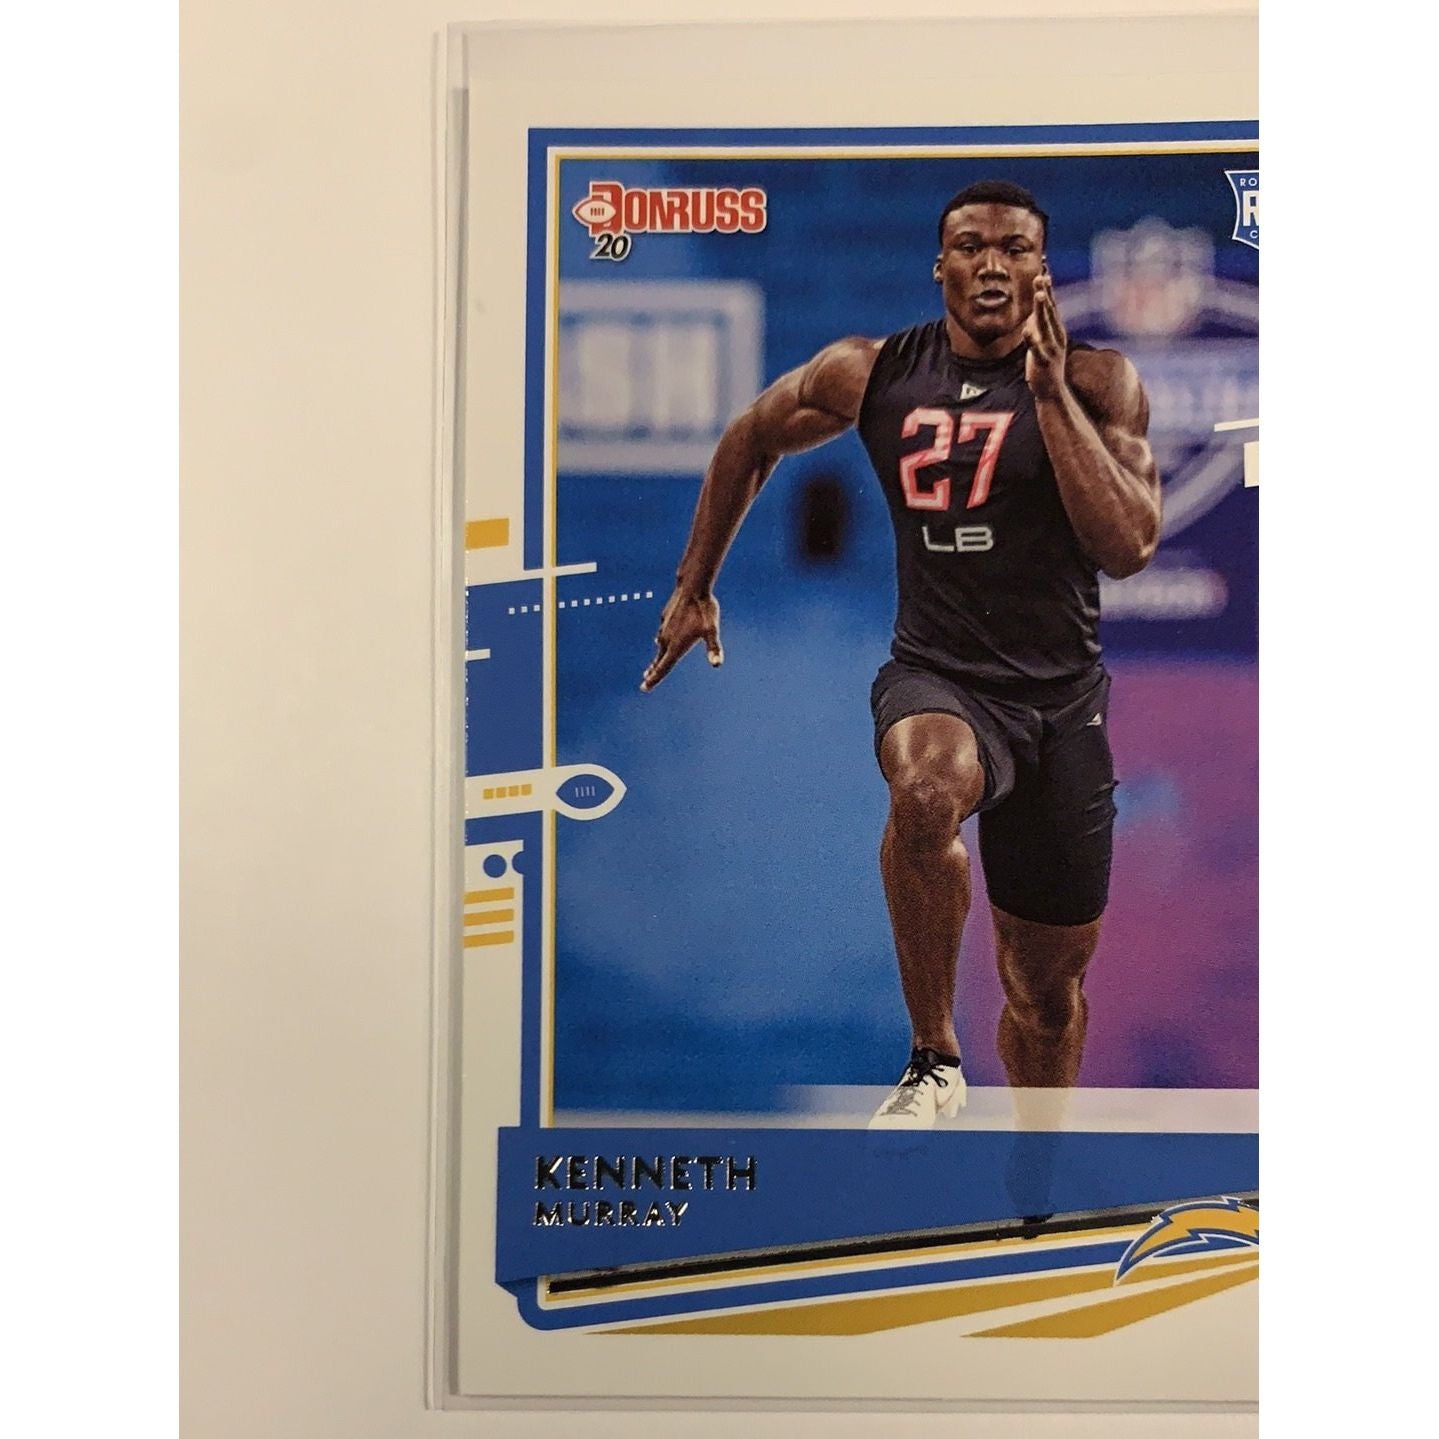  2020 Donruss Kenneth Murray RC  Local Legends Cards & Collectibles